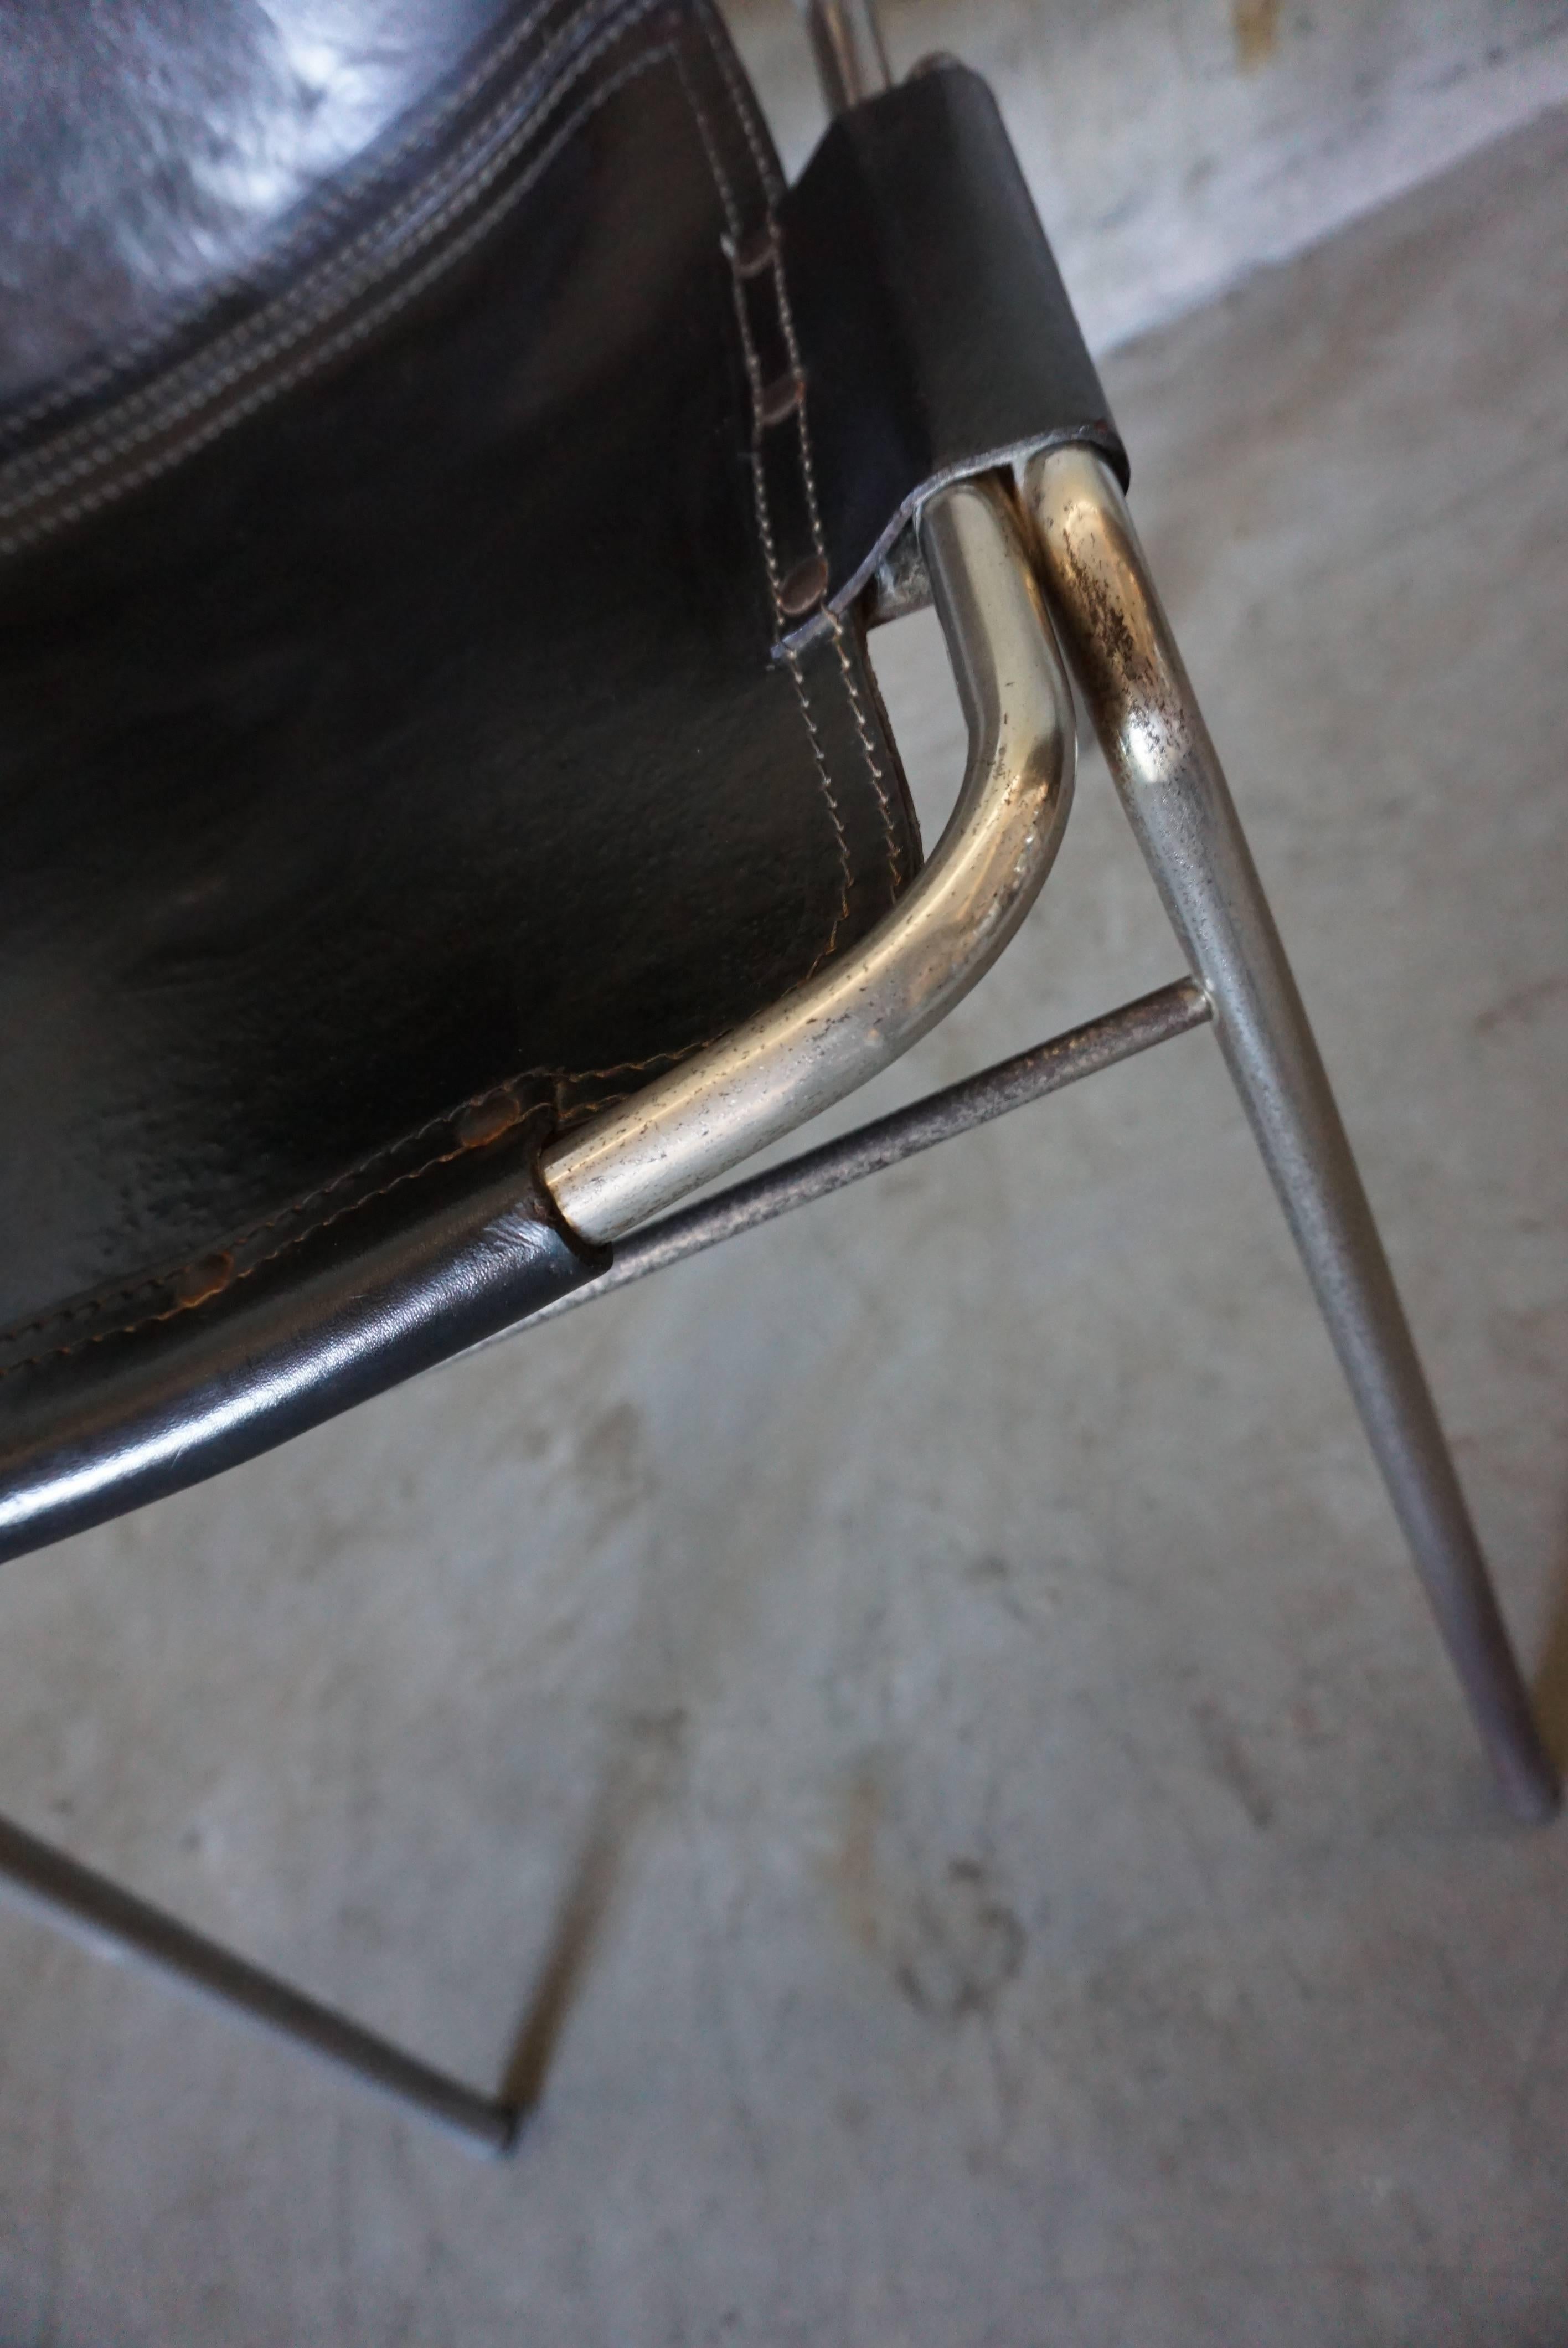 This chair was designed by Charlotte Perriand for Les Arcs during the 1960s. It features a chrome tubular frame with thick black leather seats.